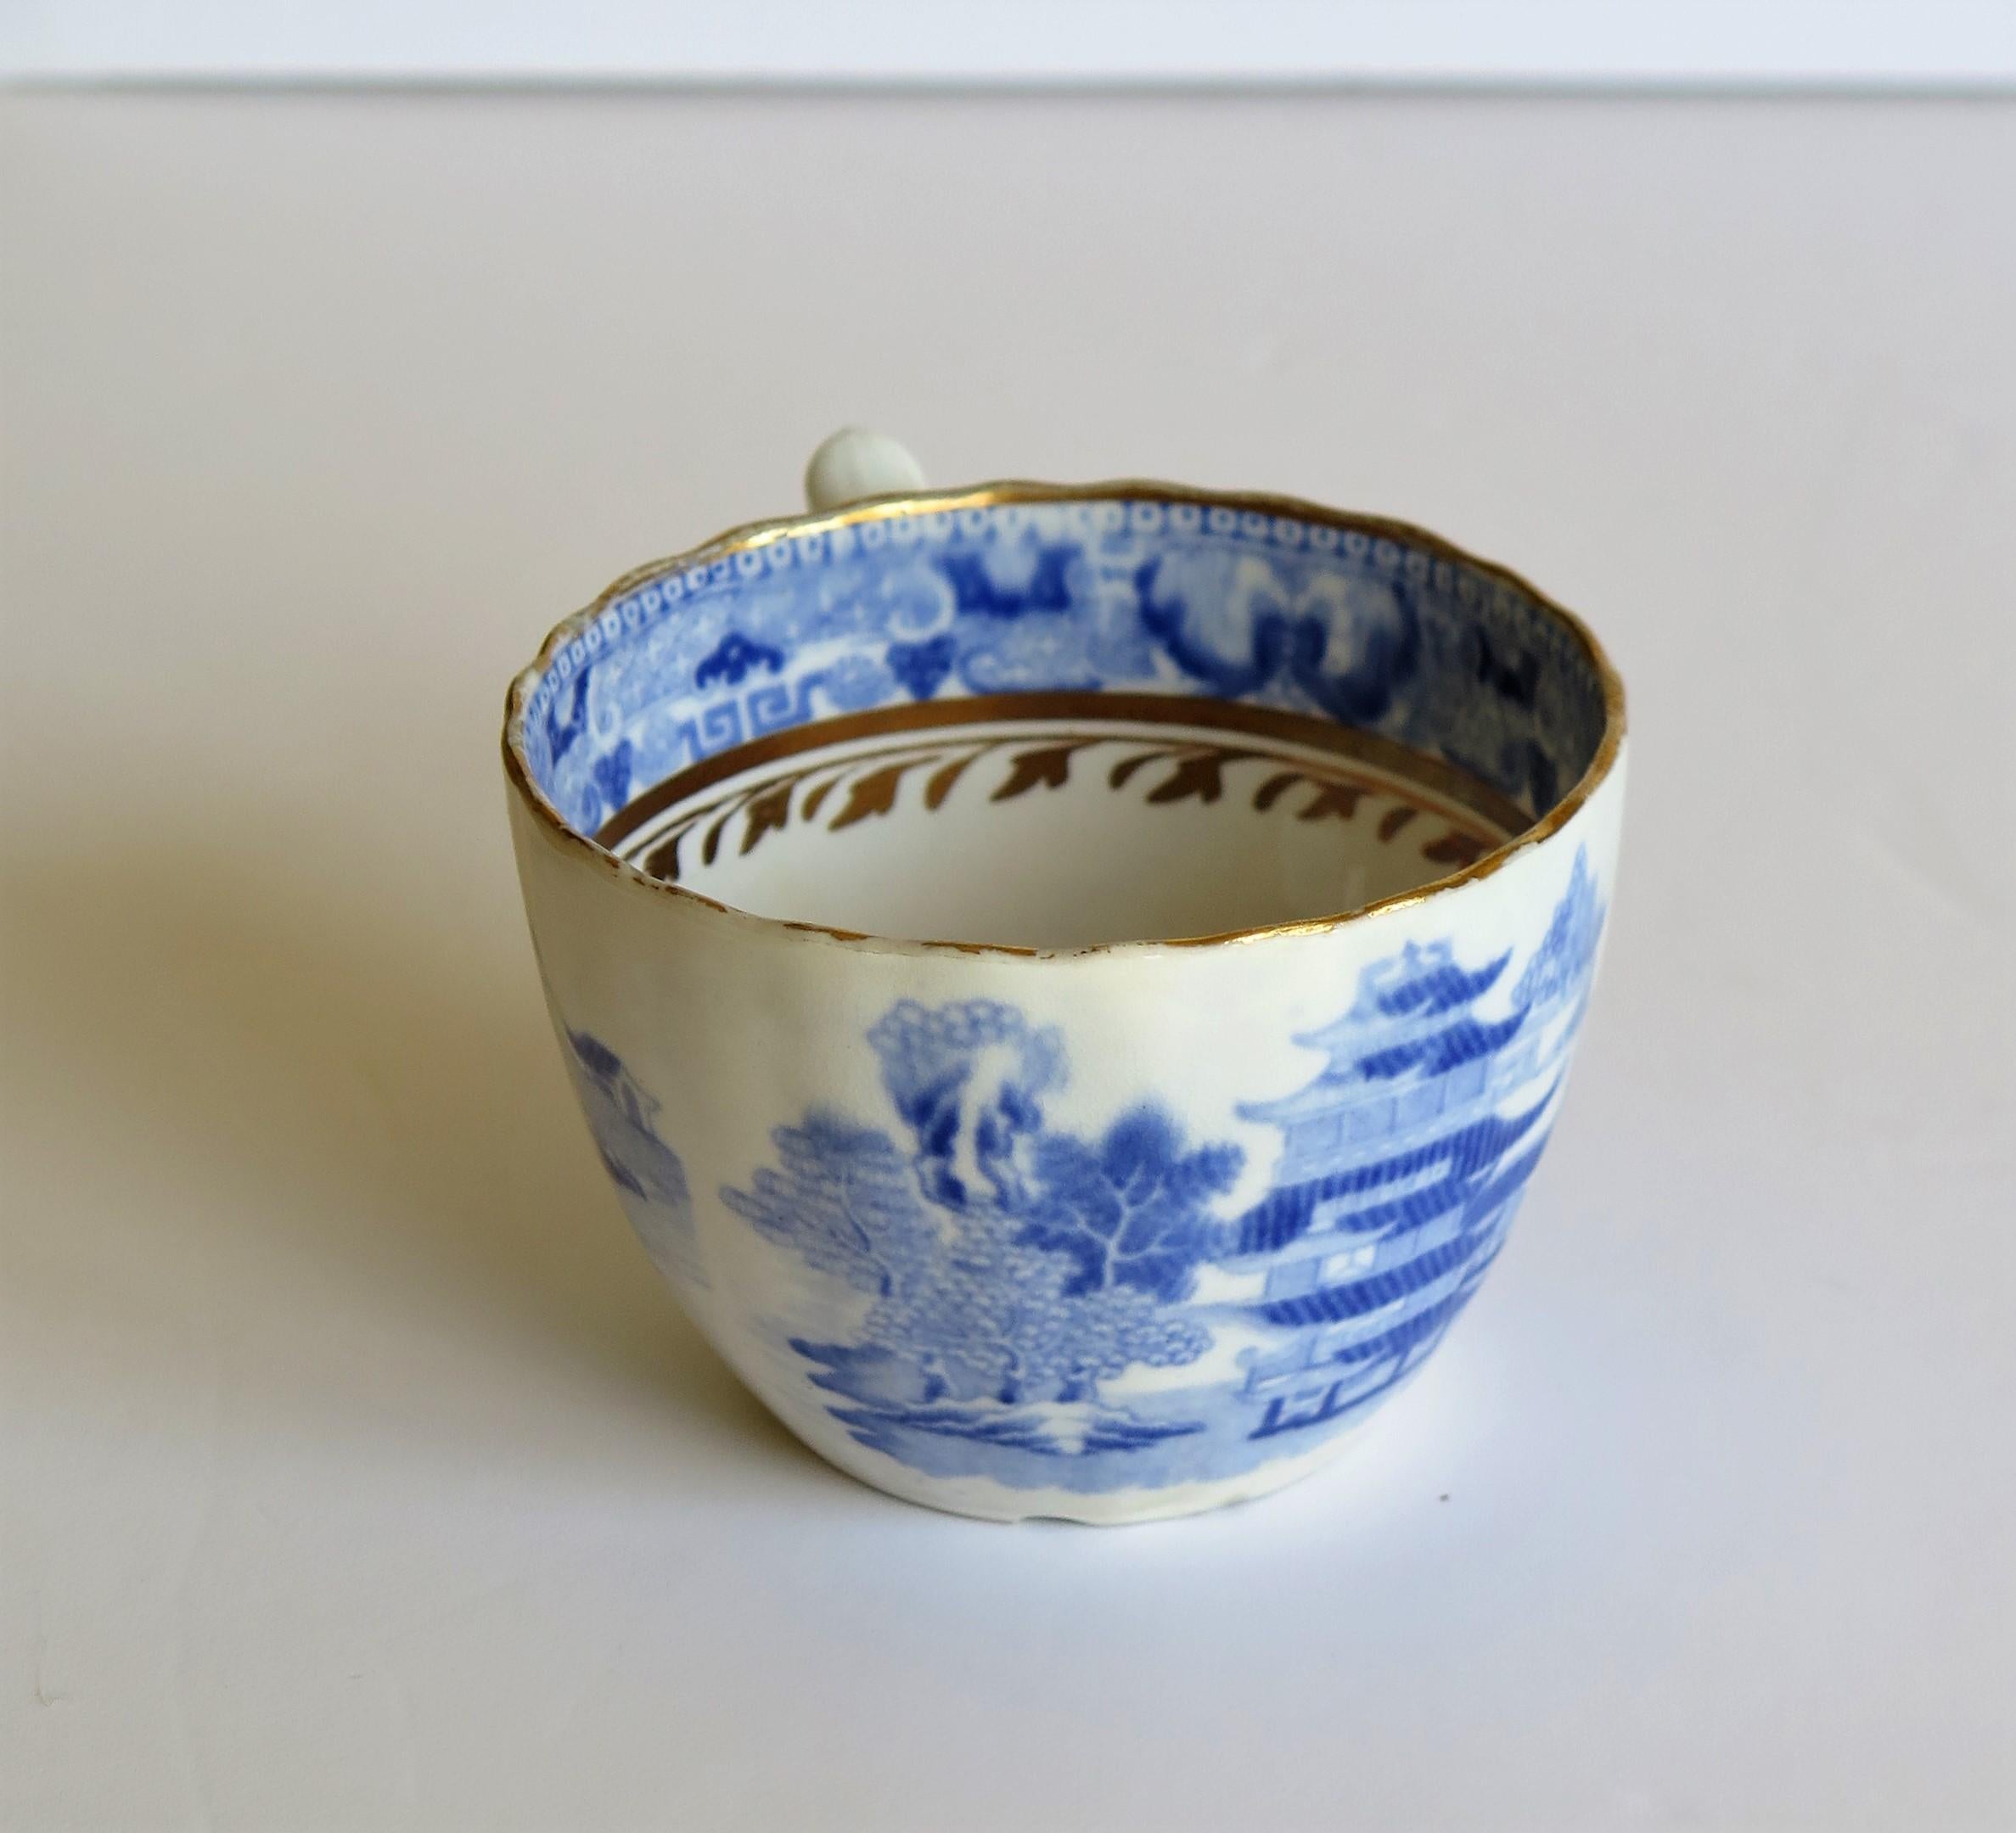 Miles Mason Porcelain Pair of Tea Cups Broseley Blue and White Pattern, Ca 1805 3